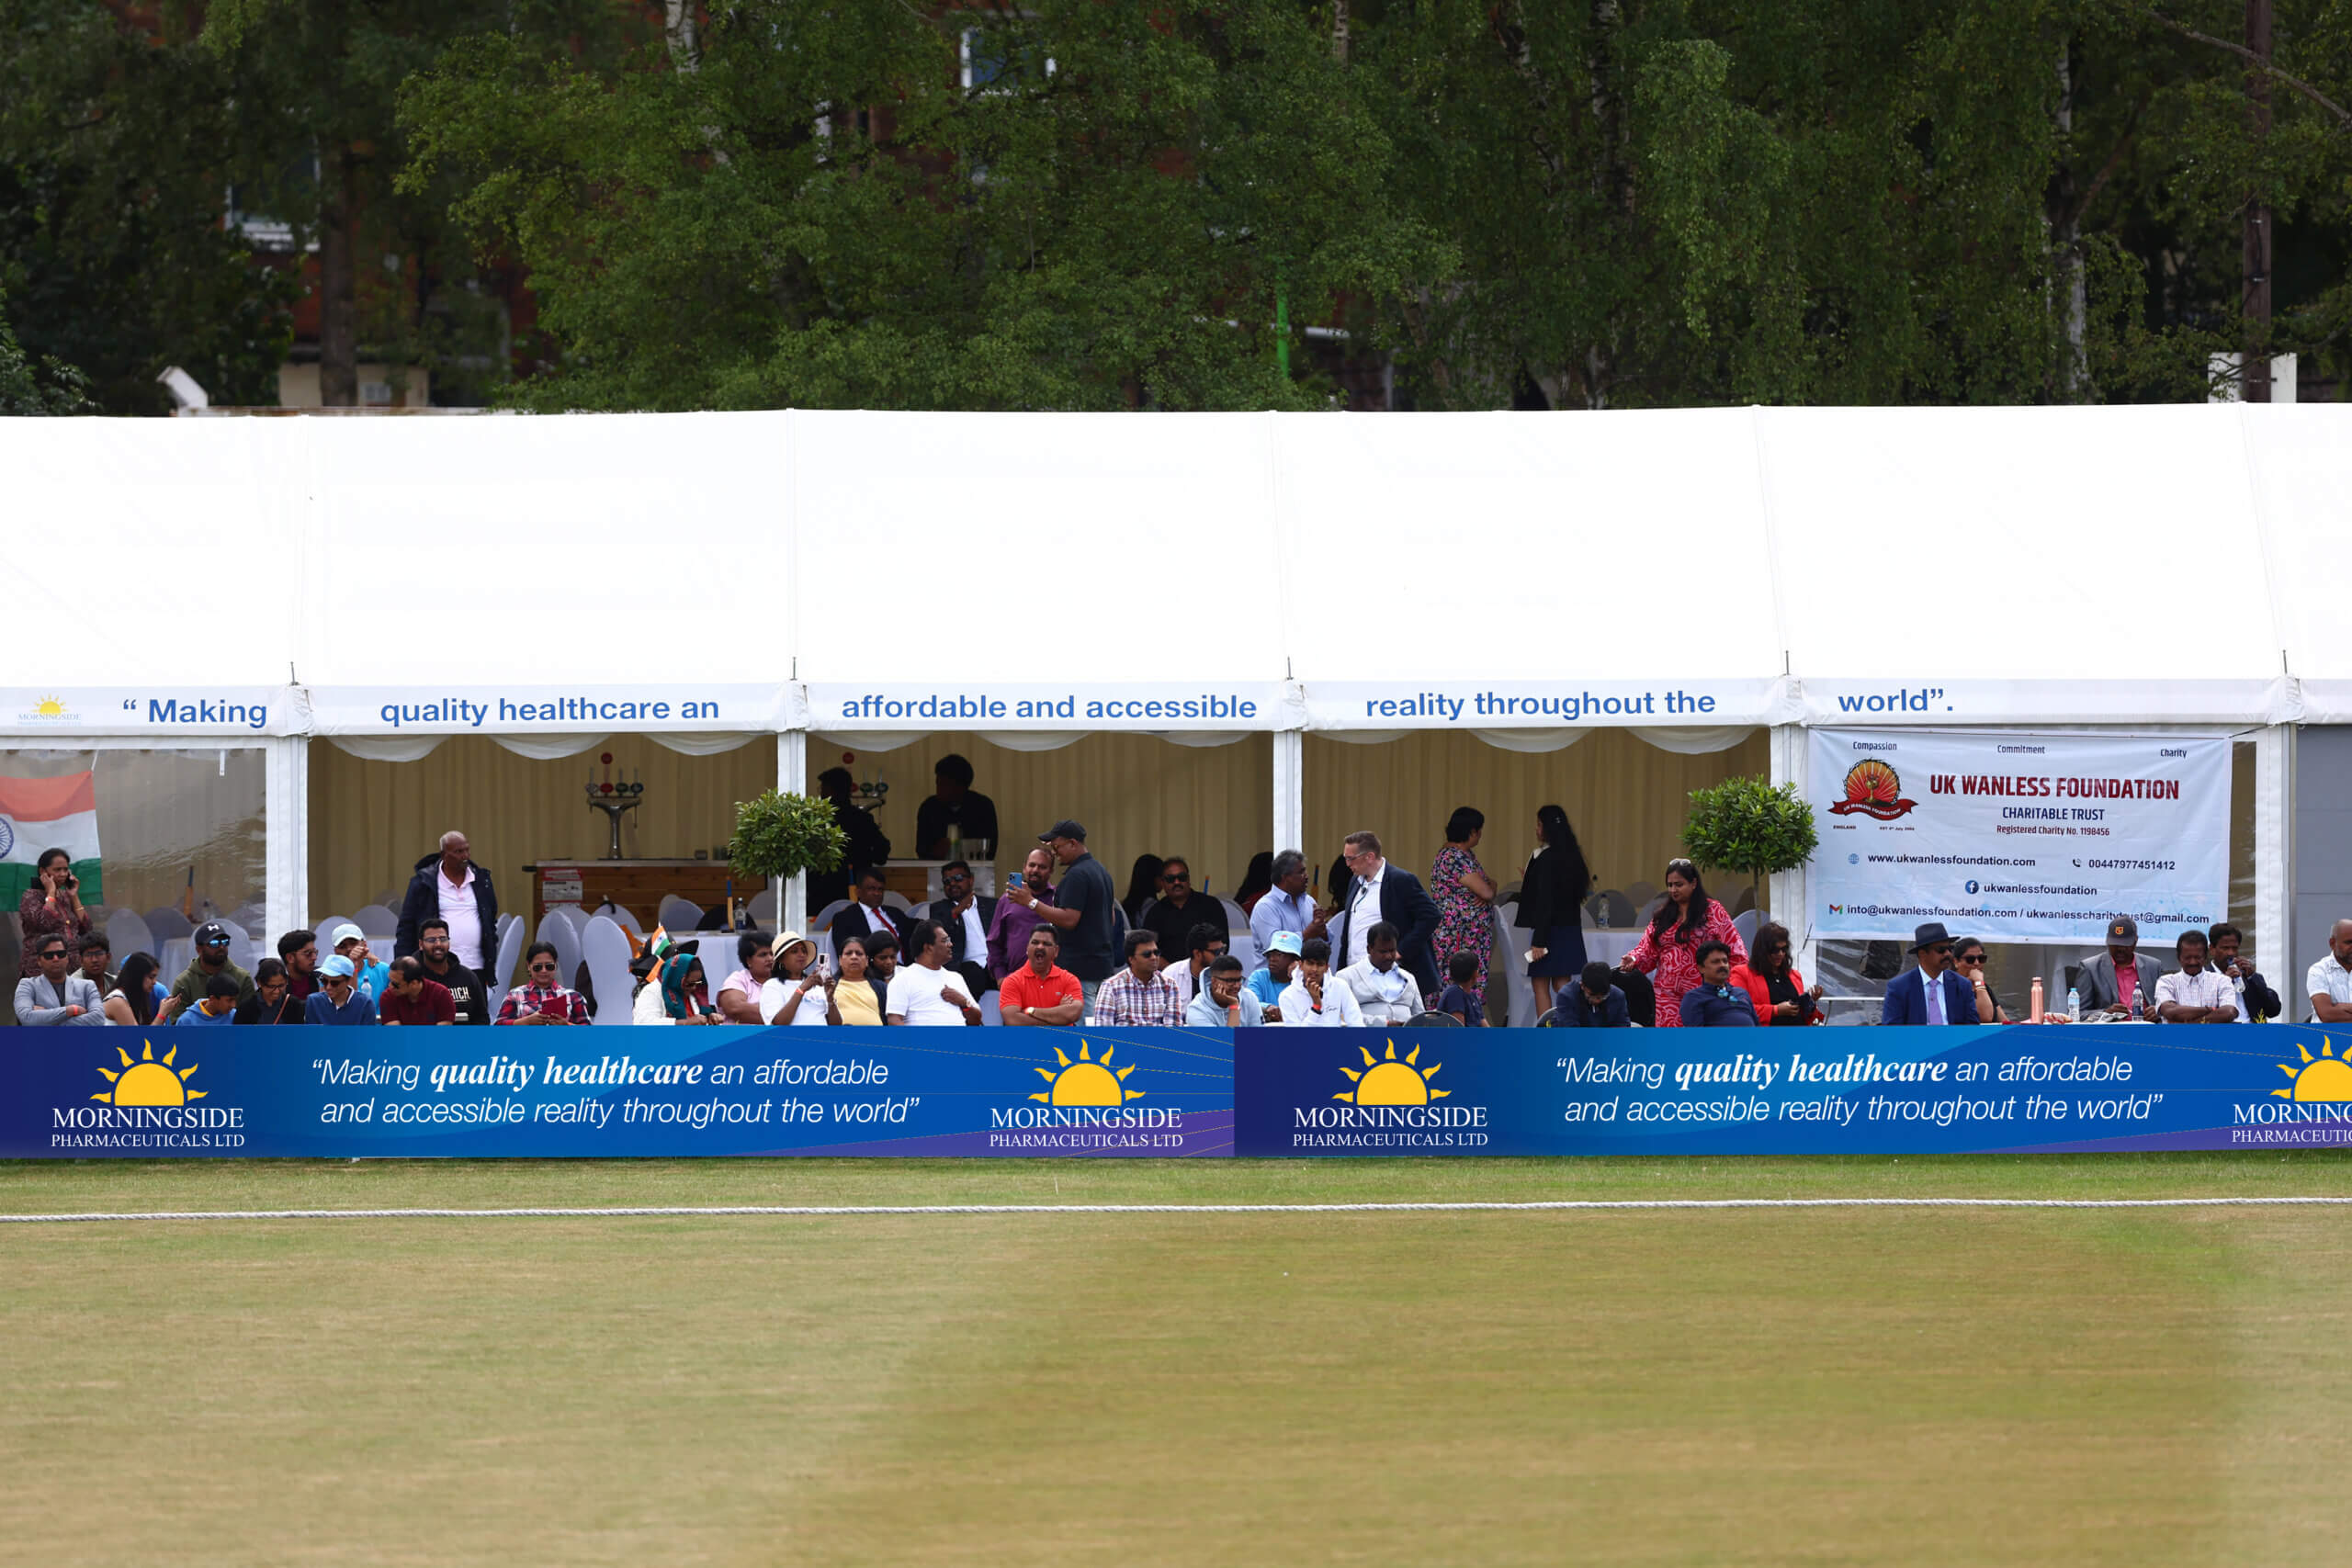 Morningside Marquee at Leicestershire County Cricket Club